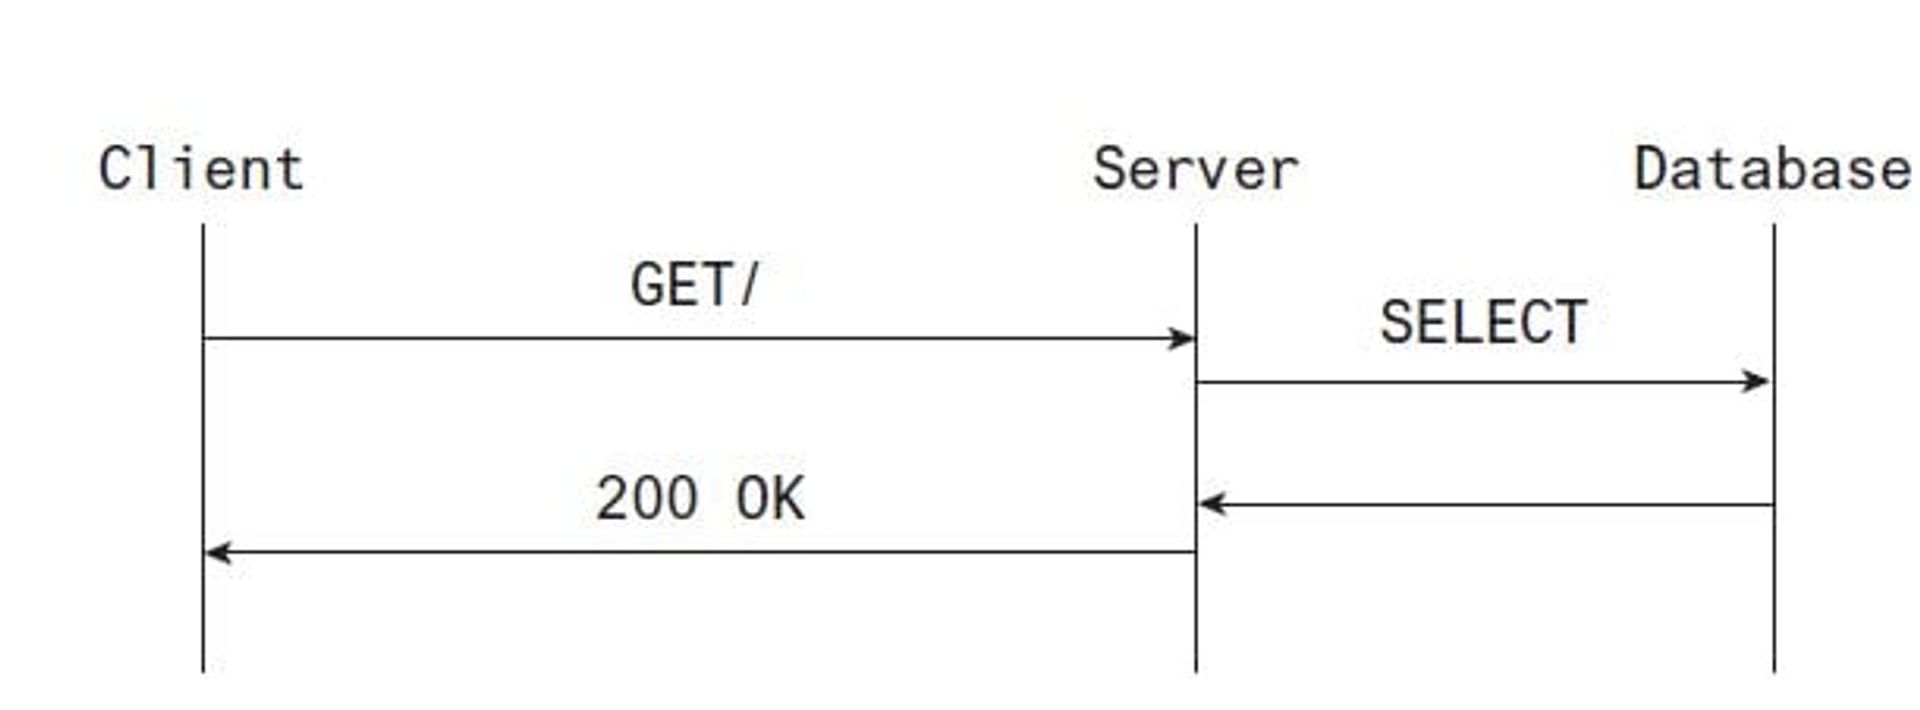 A client-server interaction backed by a database